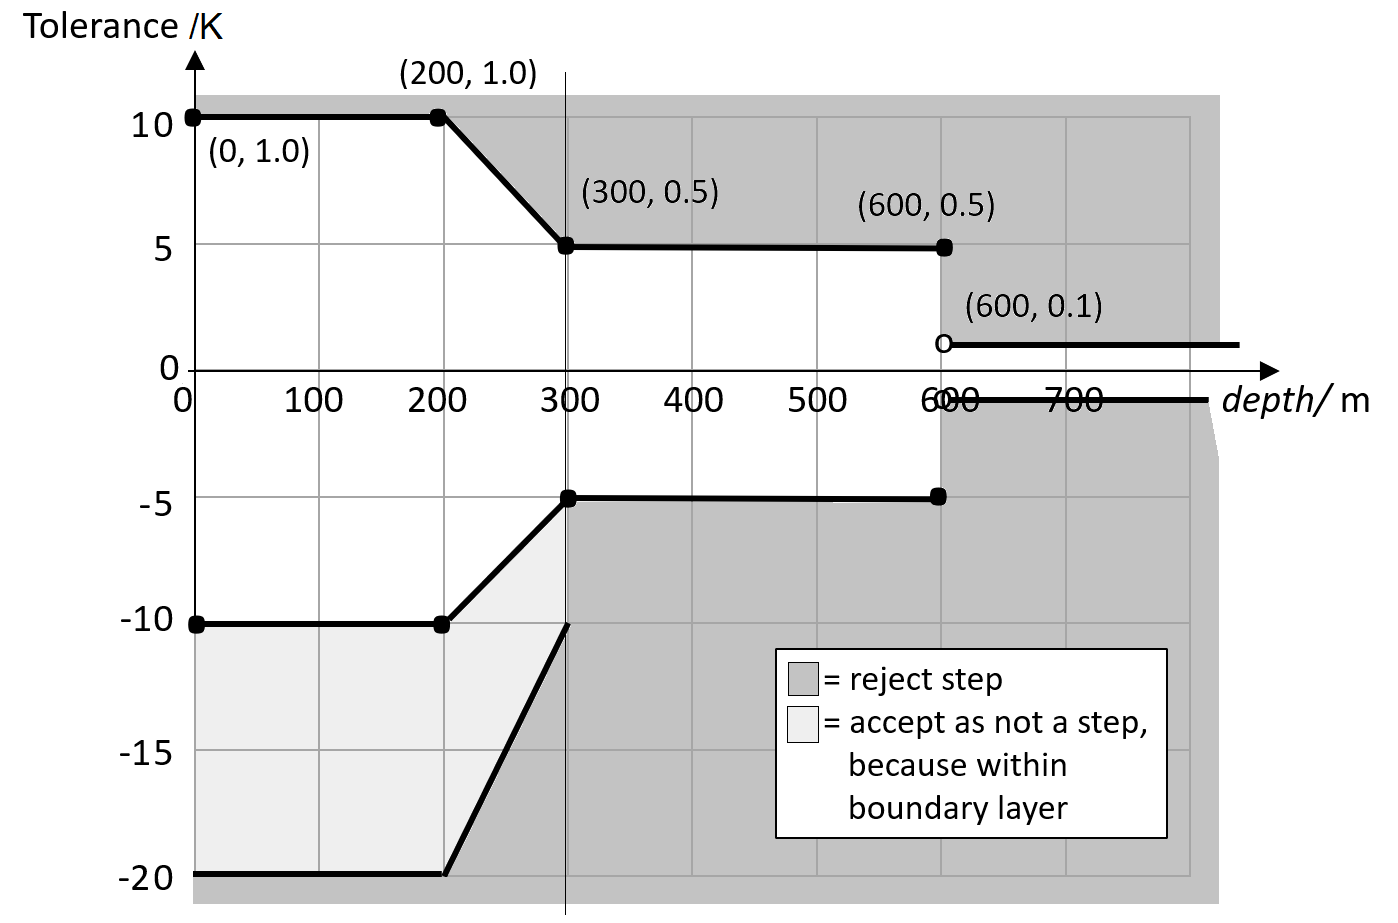 Adjacent points with dy exceeding the tolerance (positive or negative) are flagged as steps; but if x is within the boundary layer, the tolerance to steps is relaxed by the factors given in 'step tolerance range'.